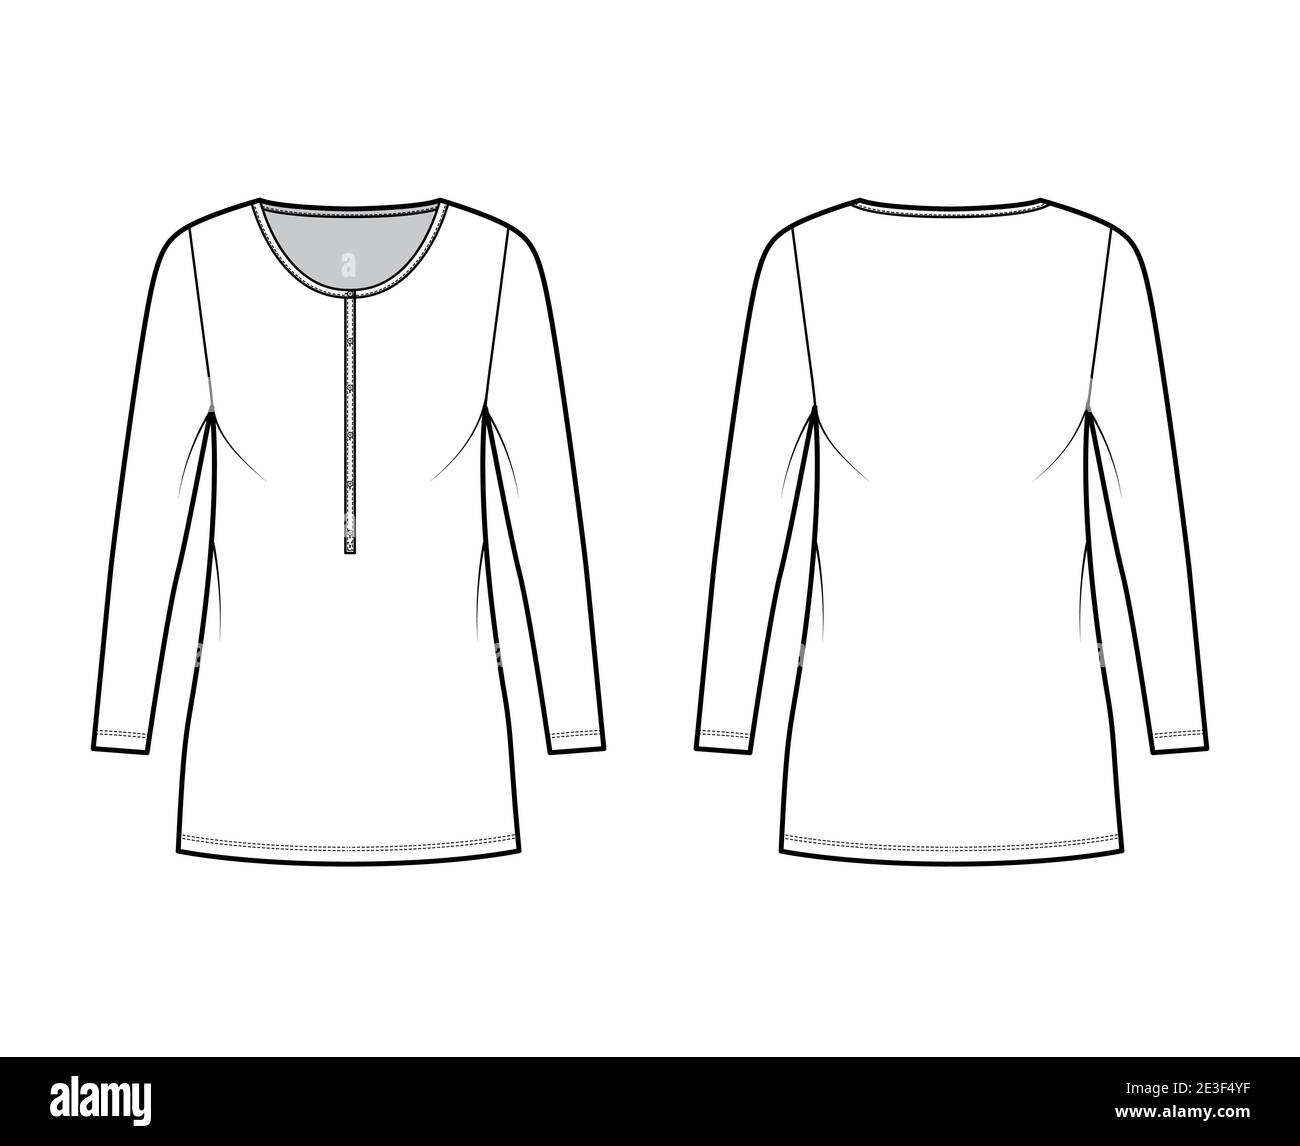 Shirt dress mini technical fashion illustration with henley neck, long sleeves, oversized, Pencil fullness, stretch jersey. Flat apparel template front, back, white color. Women, men unisex CAD mockup Stock Vector